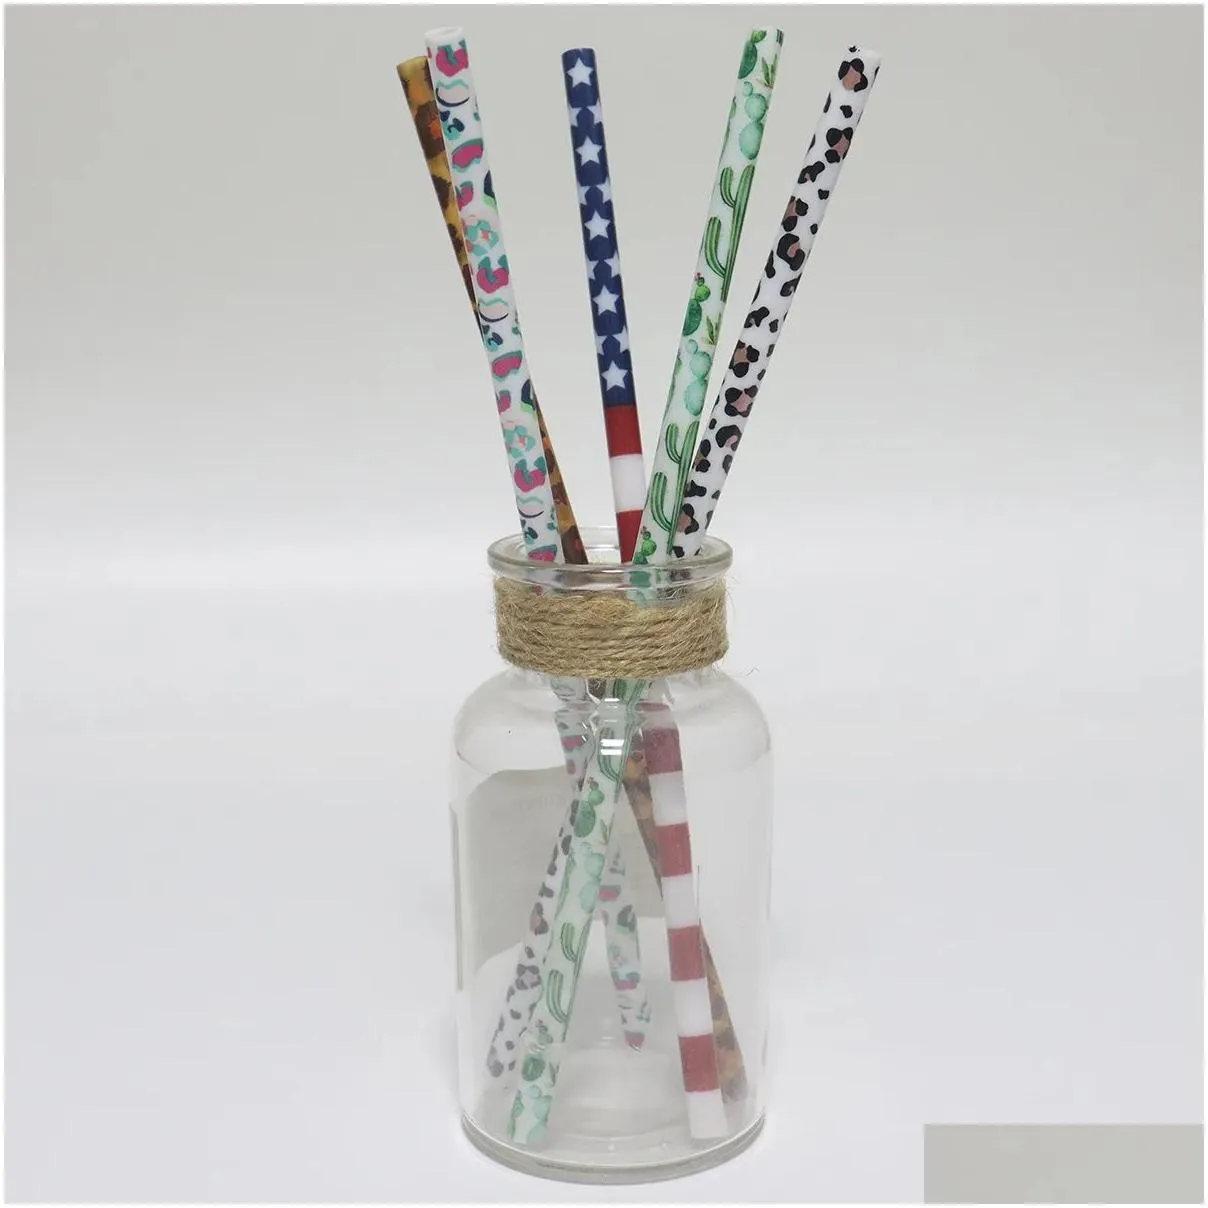 Drinking Straws 9 Inches Reusable Plastic Printed Sts Lemon Cactus Leopard Daisy Camouflage American Flag Zebra Pattern For Mason Jar Dhuev